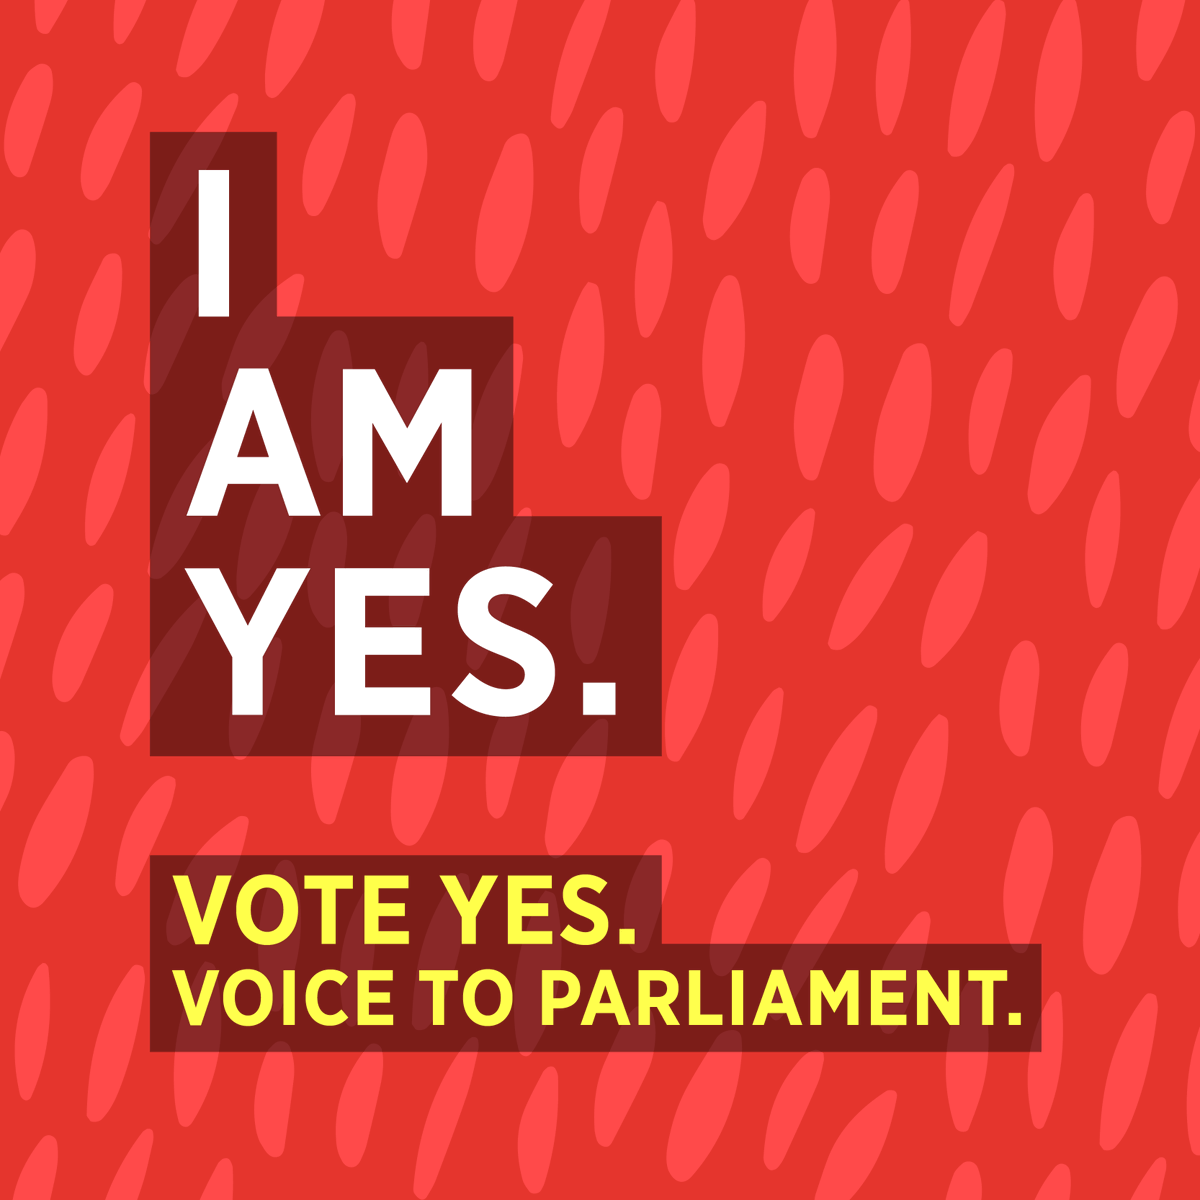 We are the Yes campaign.
In schools, in a team, on a walk or at the park.
We are Yes. I am Yes.
#VoteYesAustralia
#Yes23 #VoiceToParliament
#YesUluru #UluruStatement #Uluru